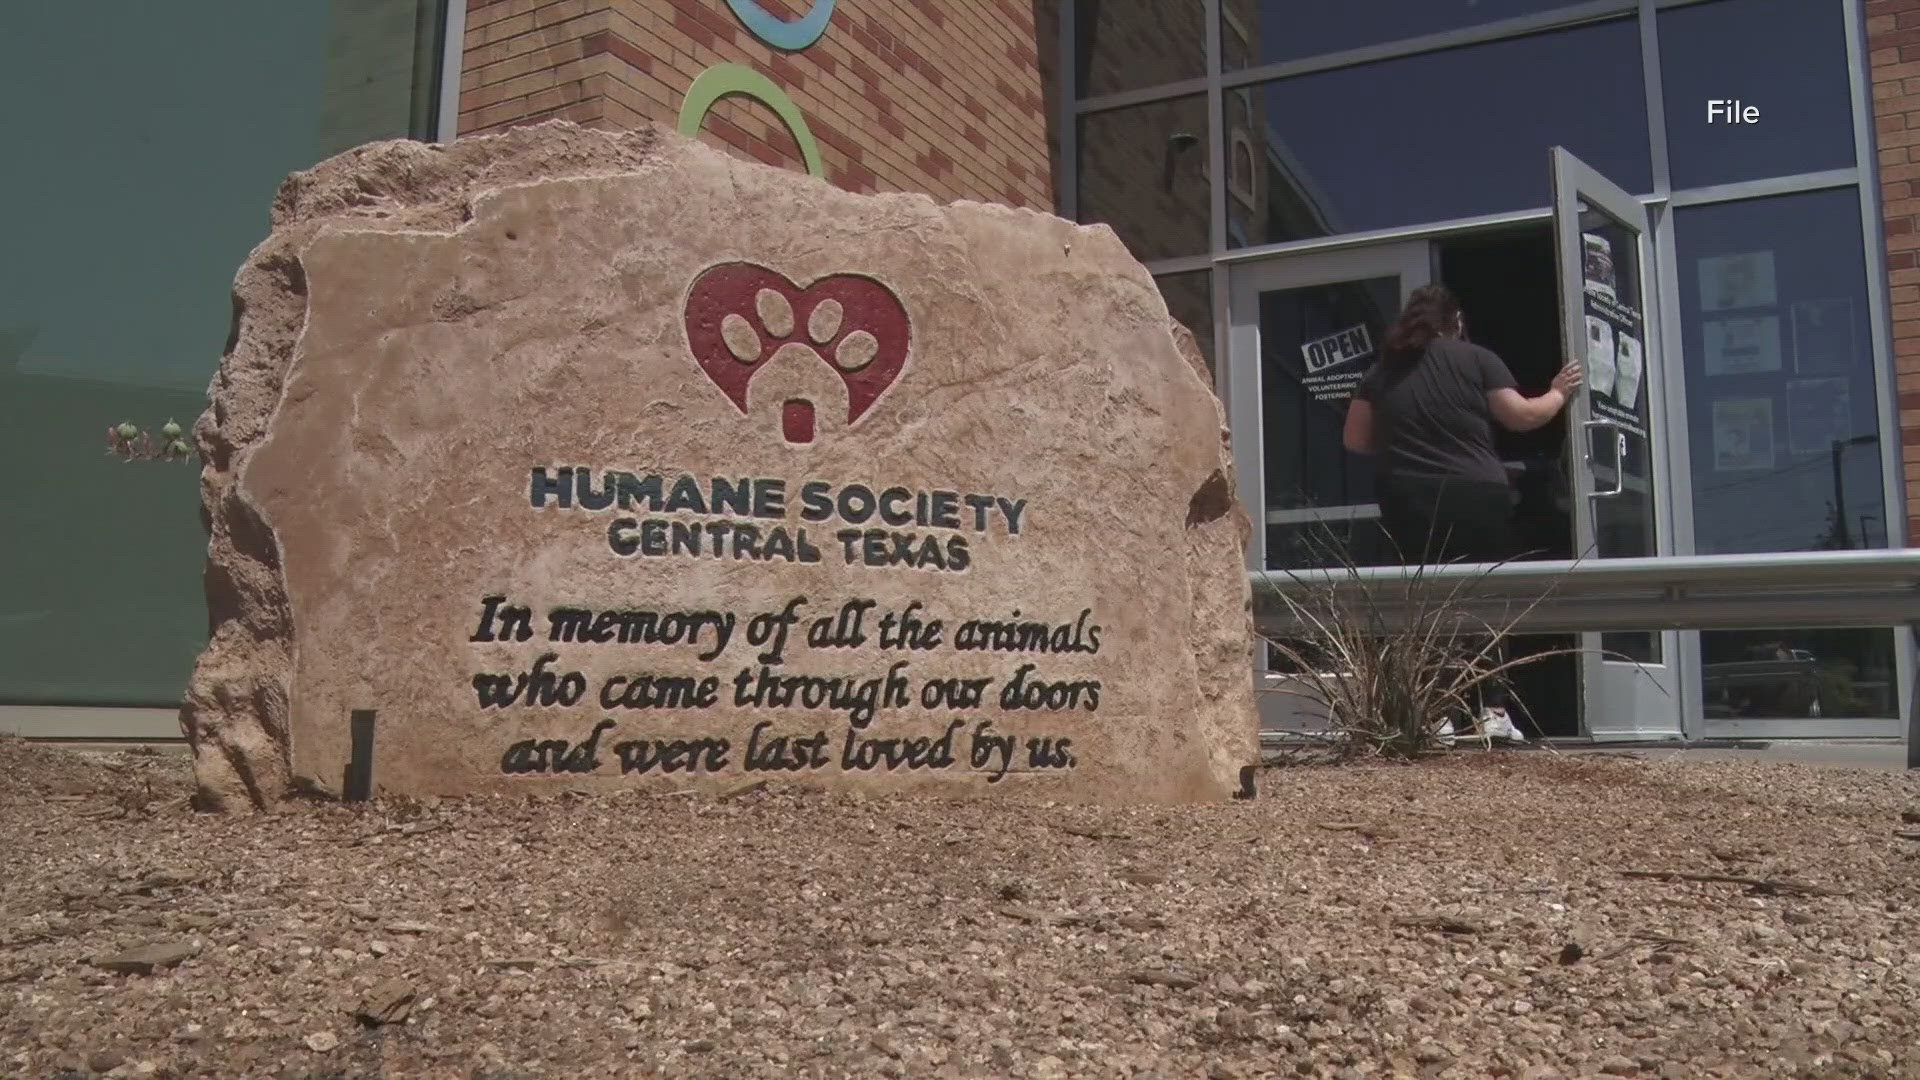 The Humane Society of Central Texas is giving away $100 Amazon gift cards for people who adopt dogs 40lbs and up.